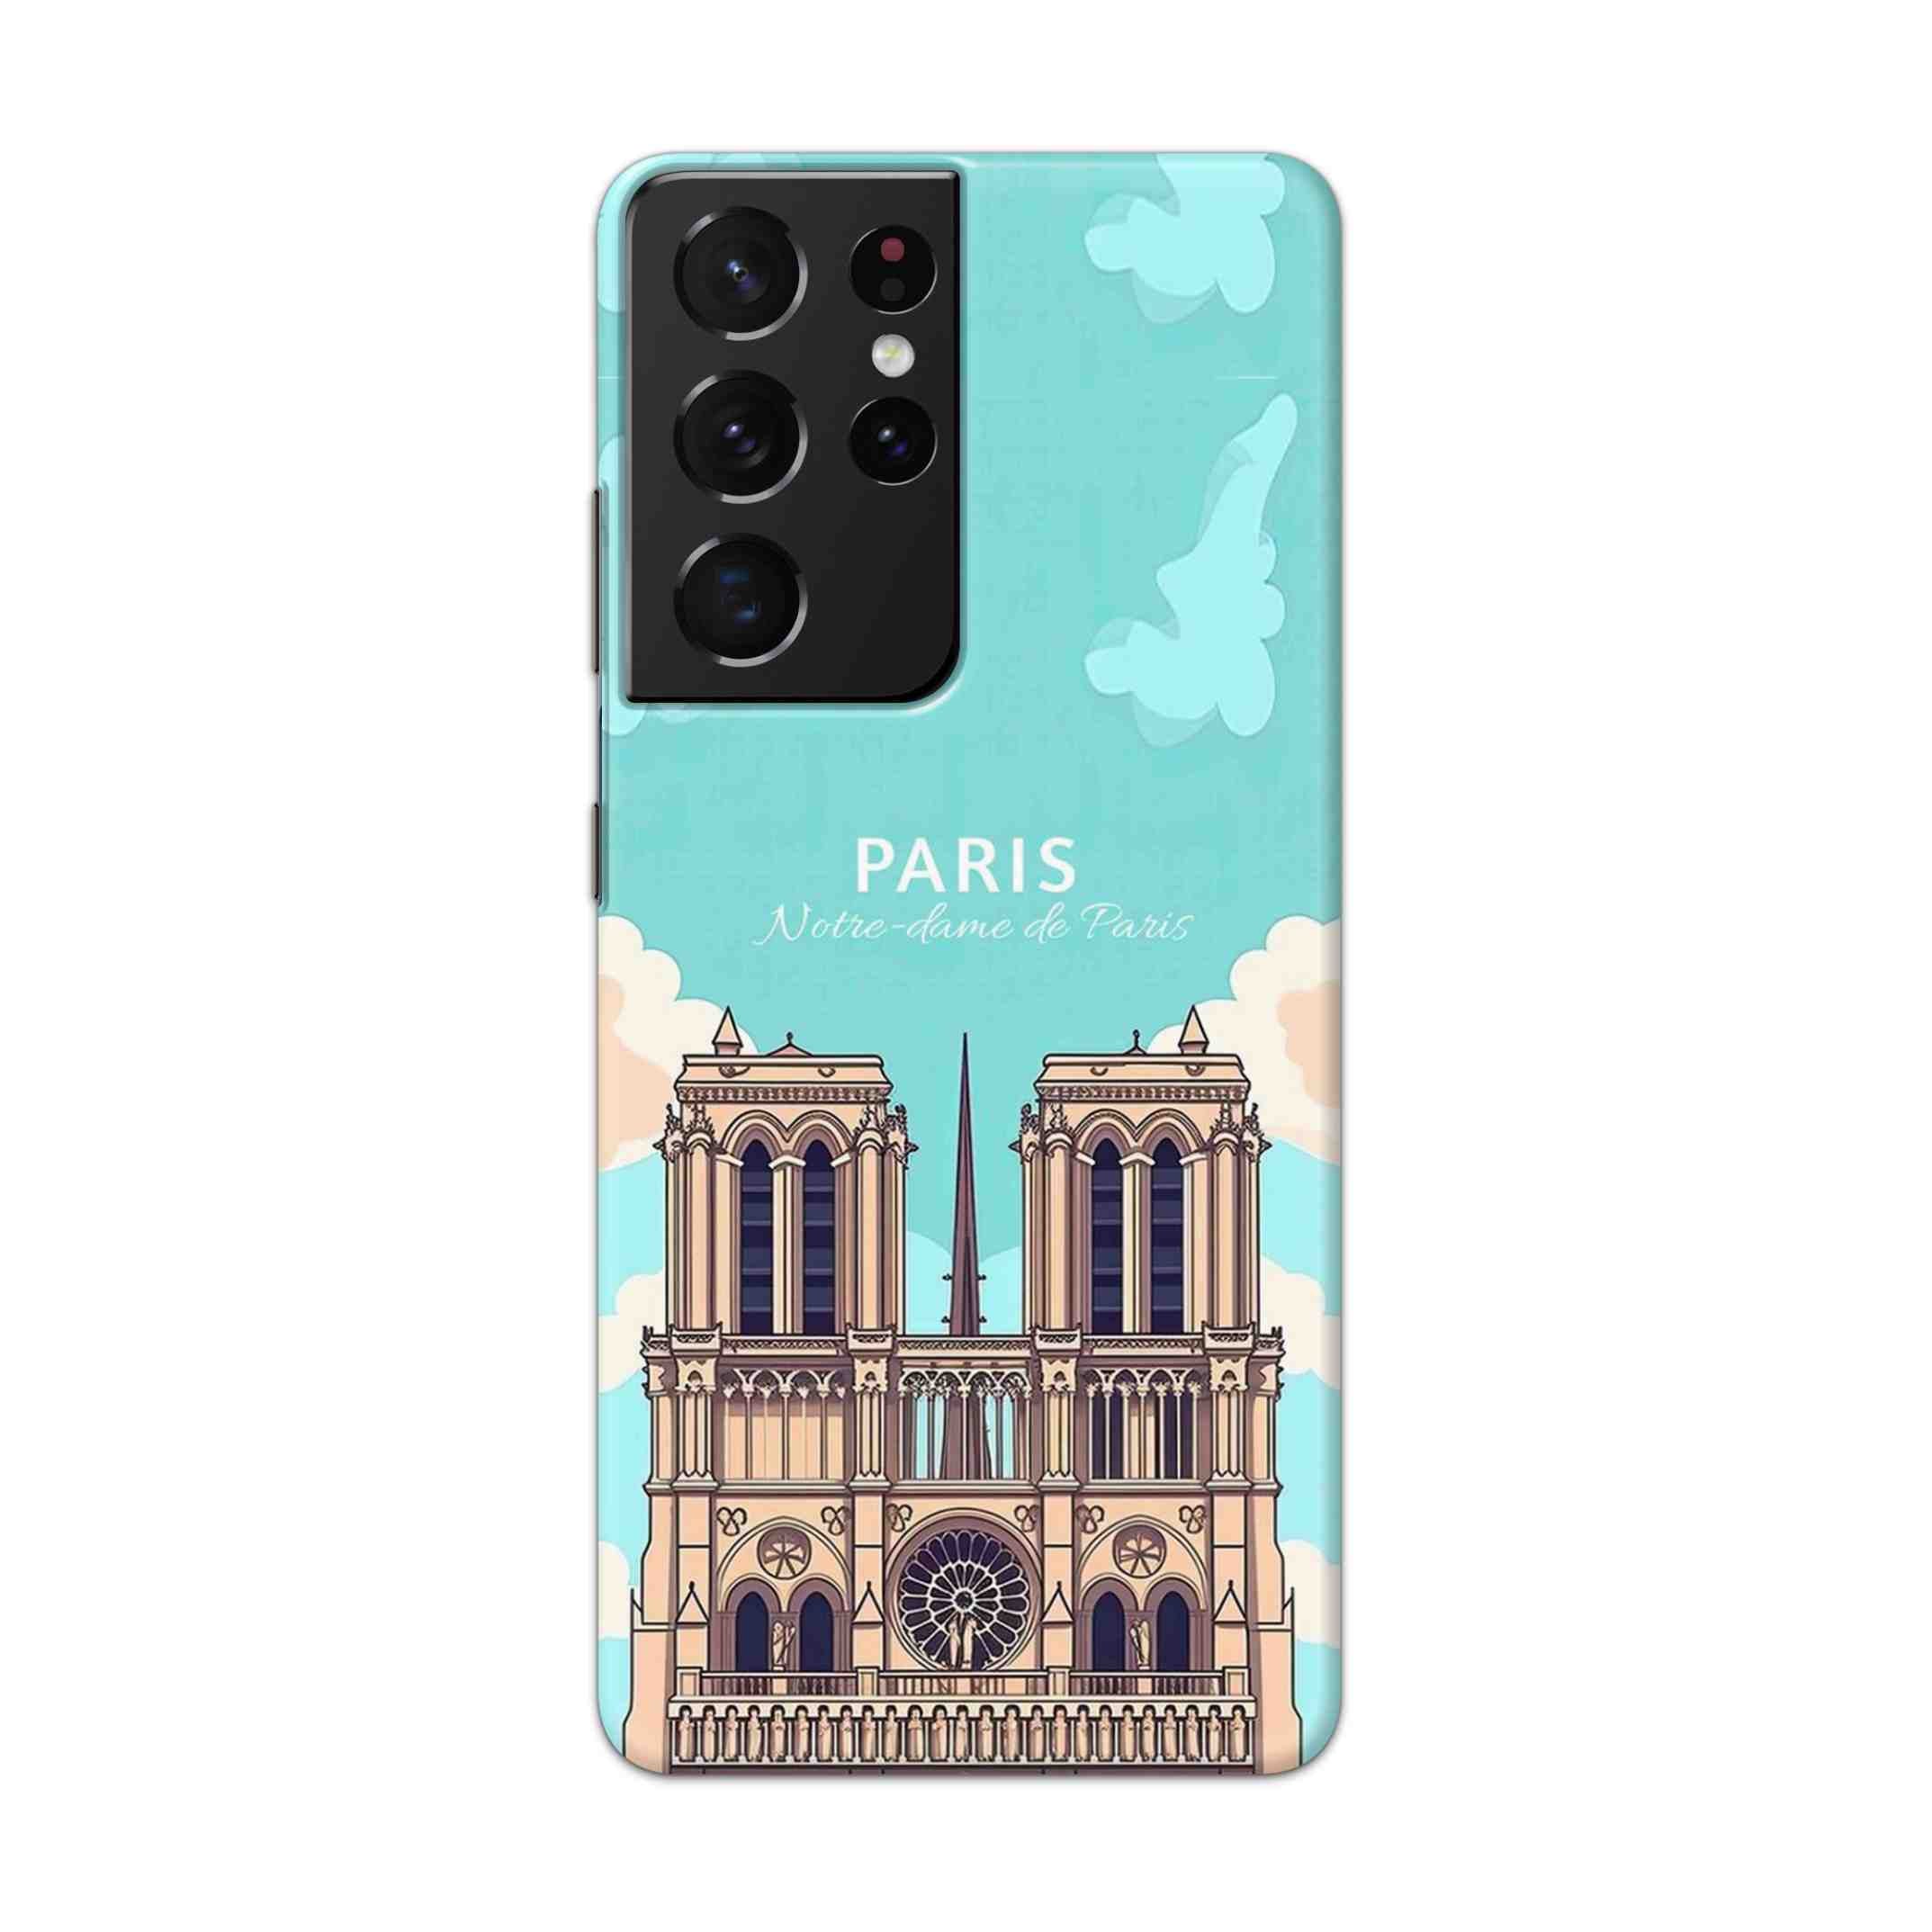 Buy Notre Dame Te Paris Hard Back Mobile Phone Case Cover For Samsung Galaxy S21 Ultra Online